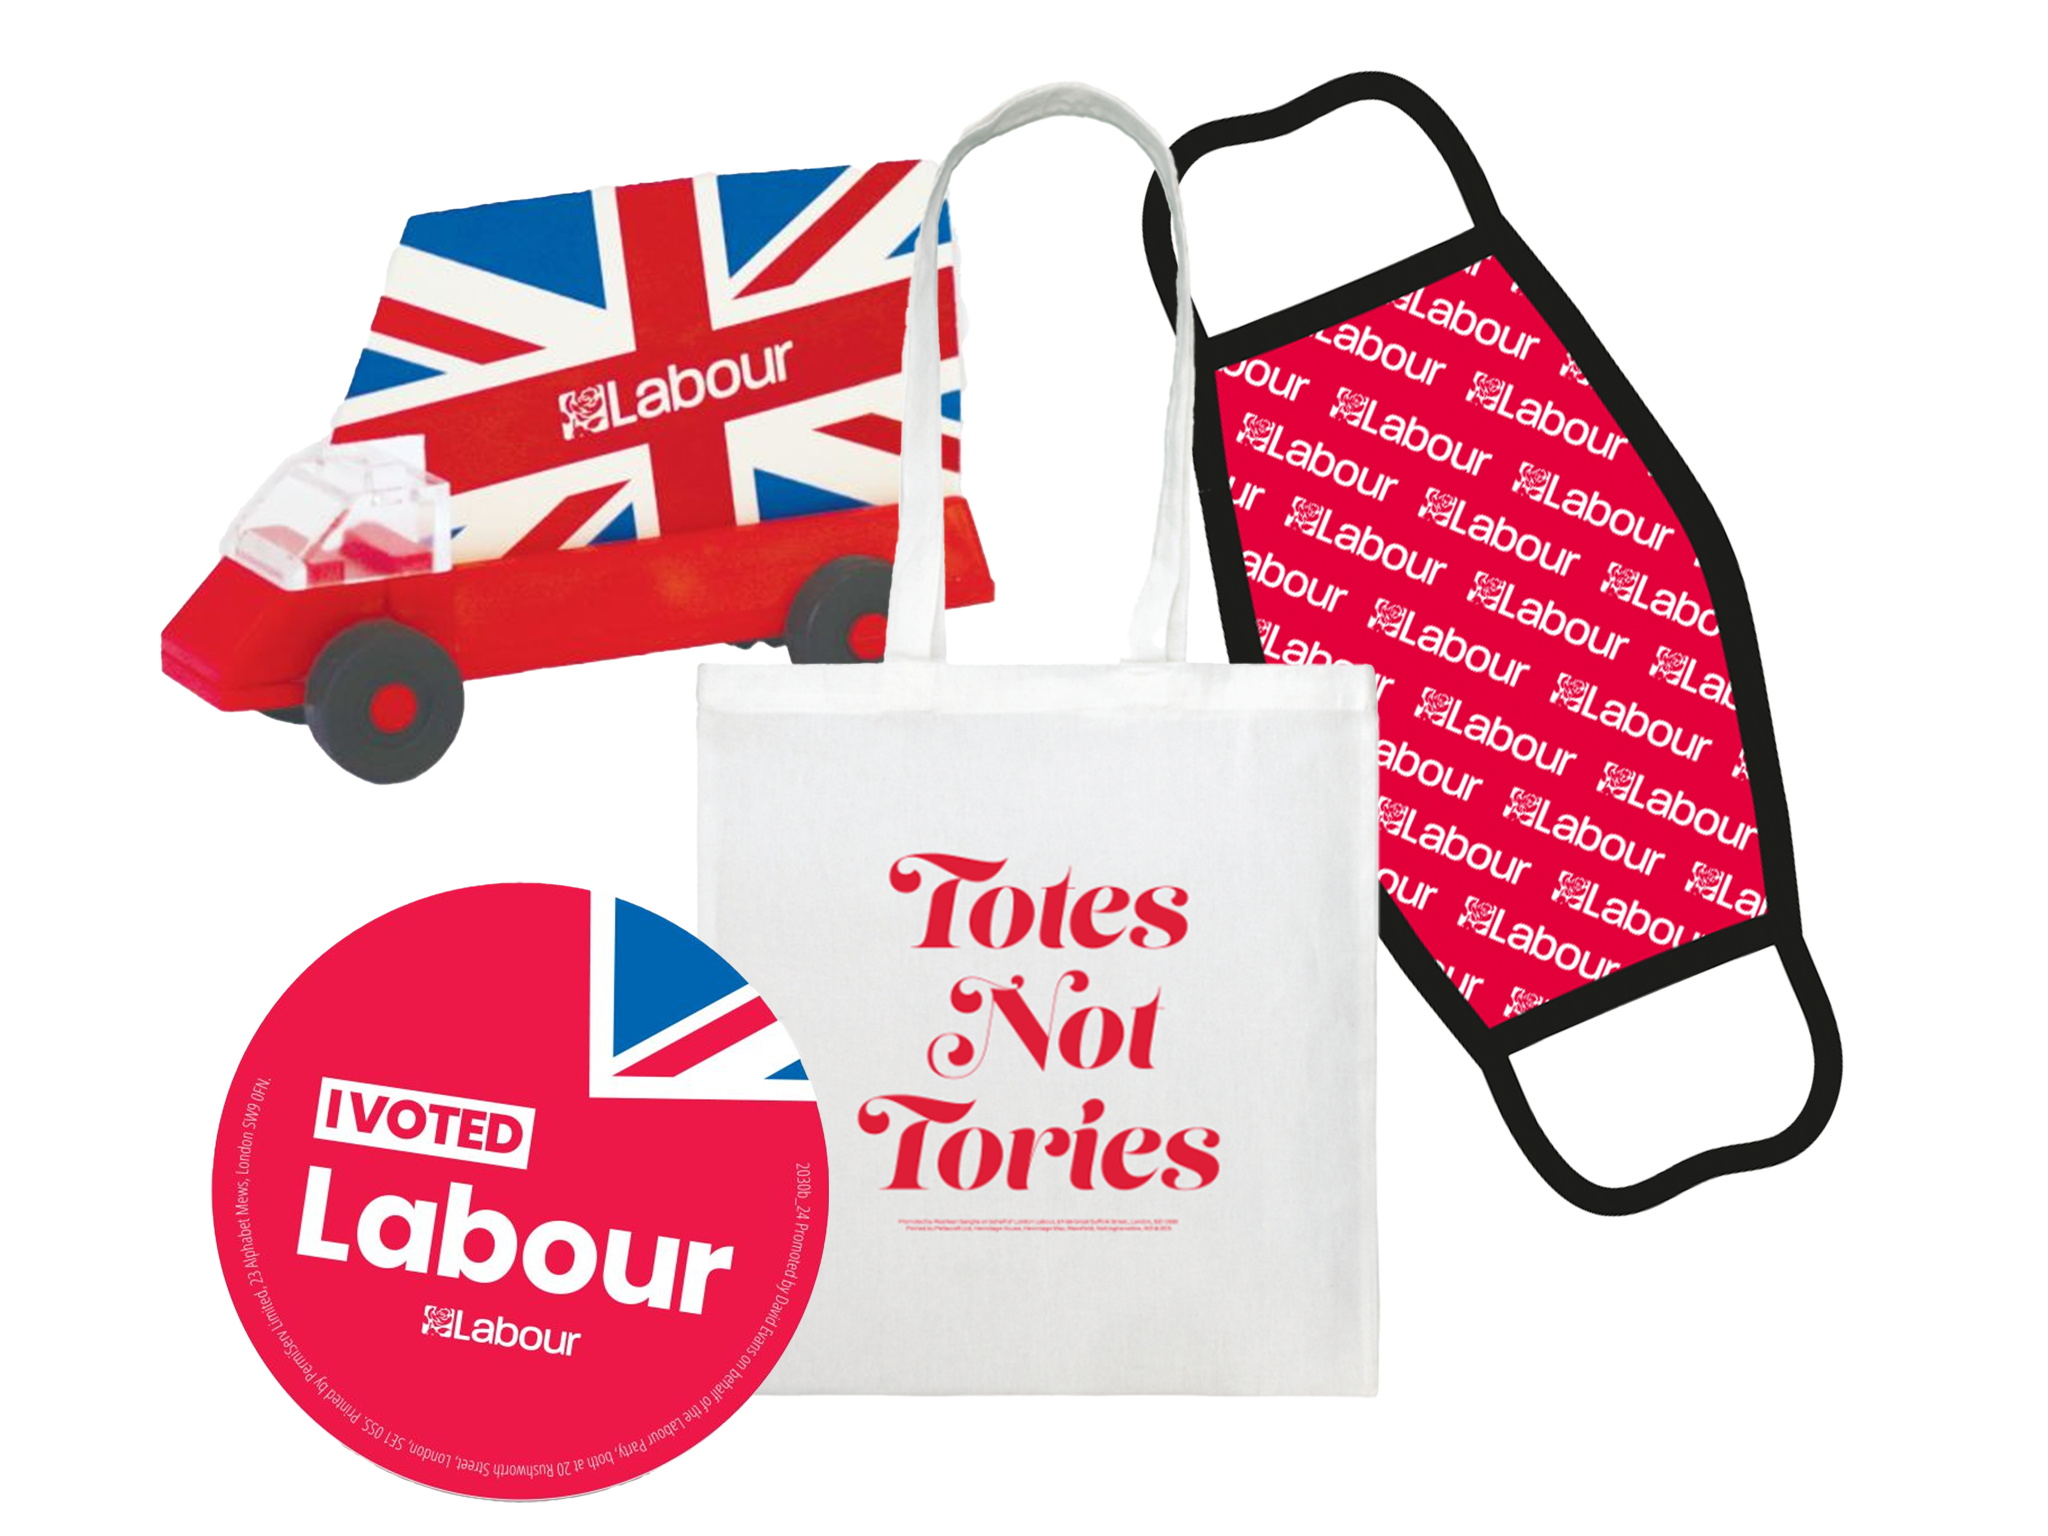 political merch has gone into overdrive – here’s the best (and worst) from the major parties